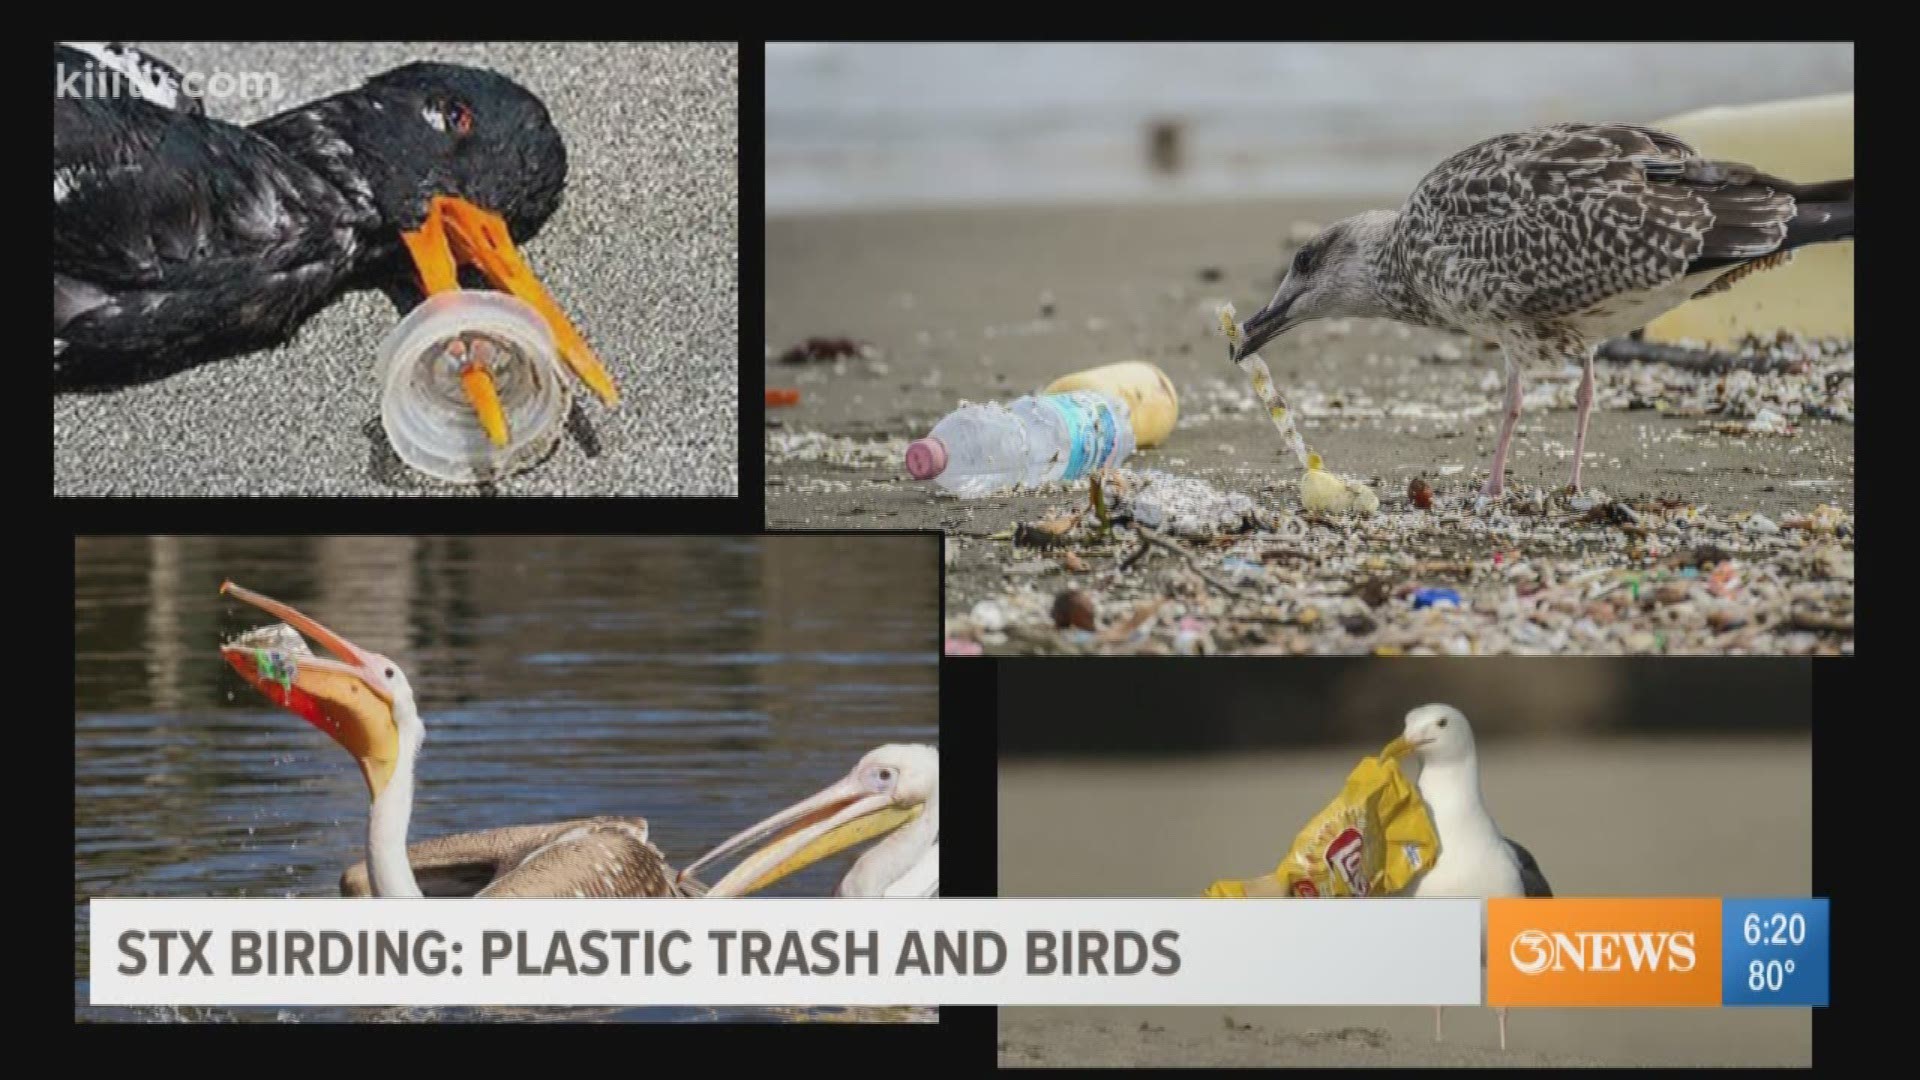 Plastic trash in the water can harm birds, sealife